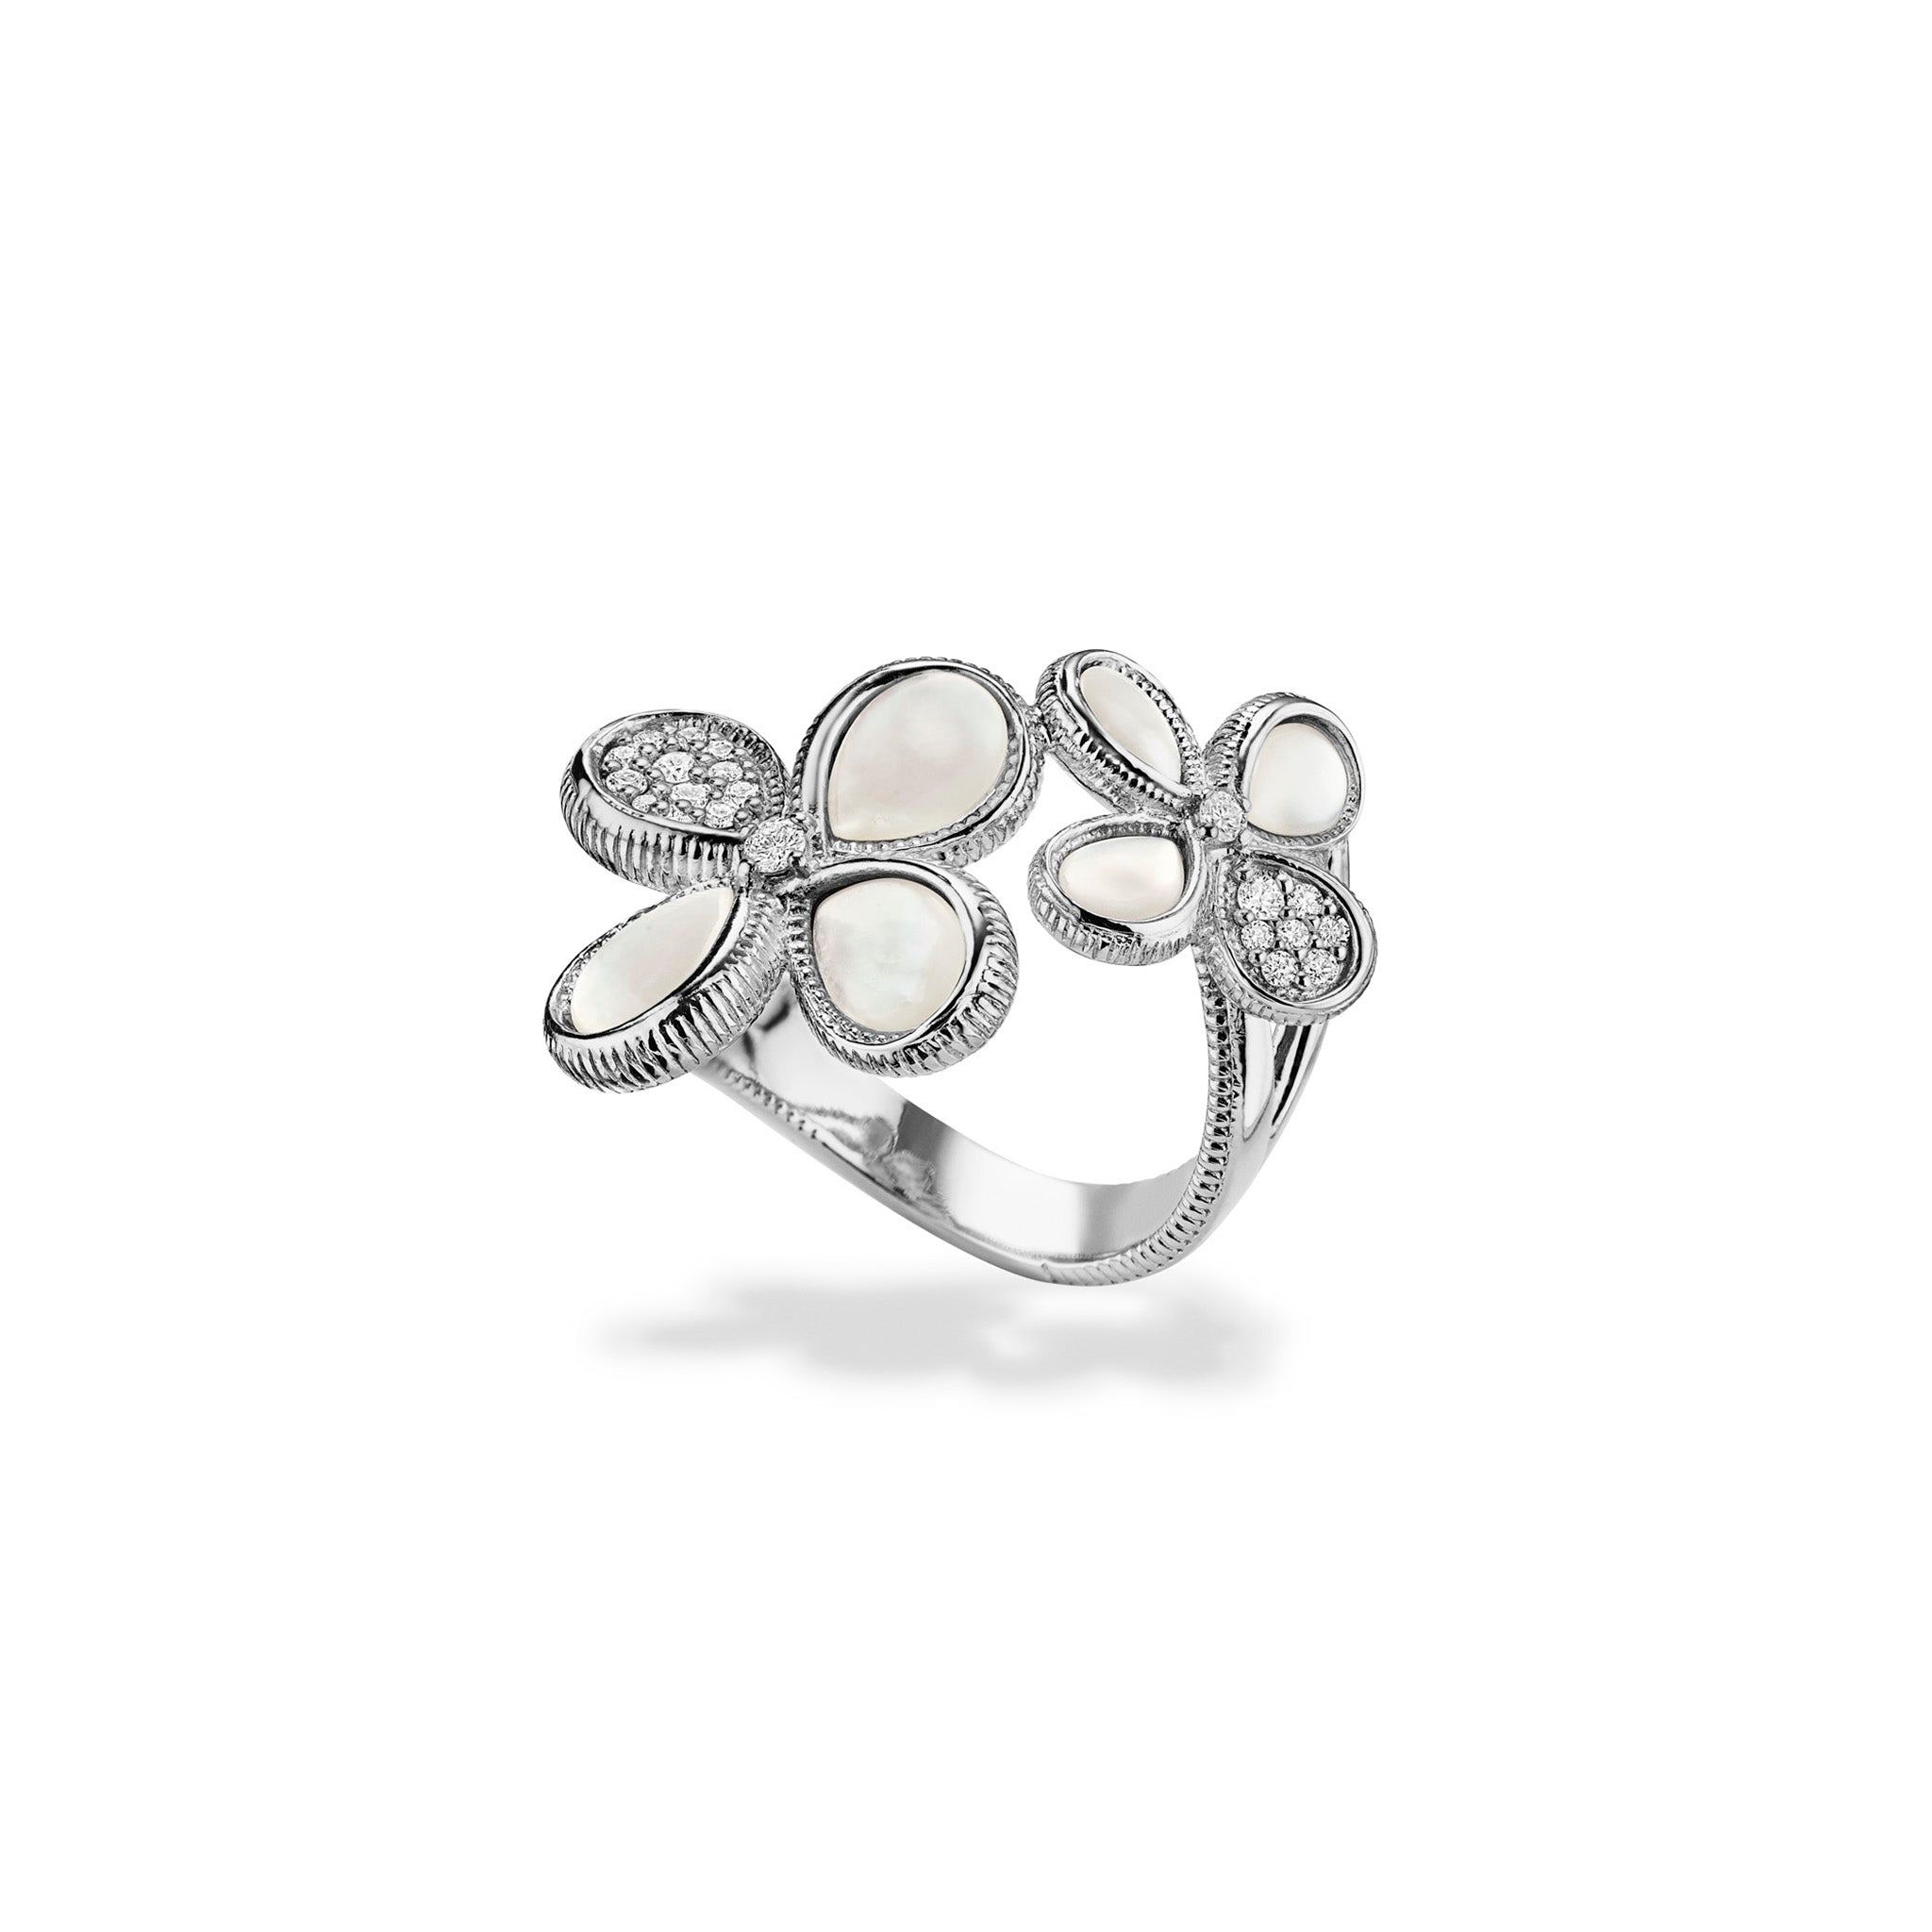 Jardin Double Flower Ring with Mother of Pearl and Cultured Diamonds